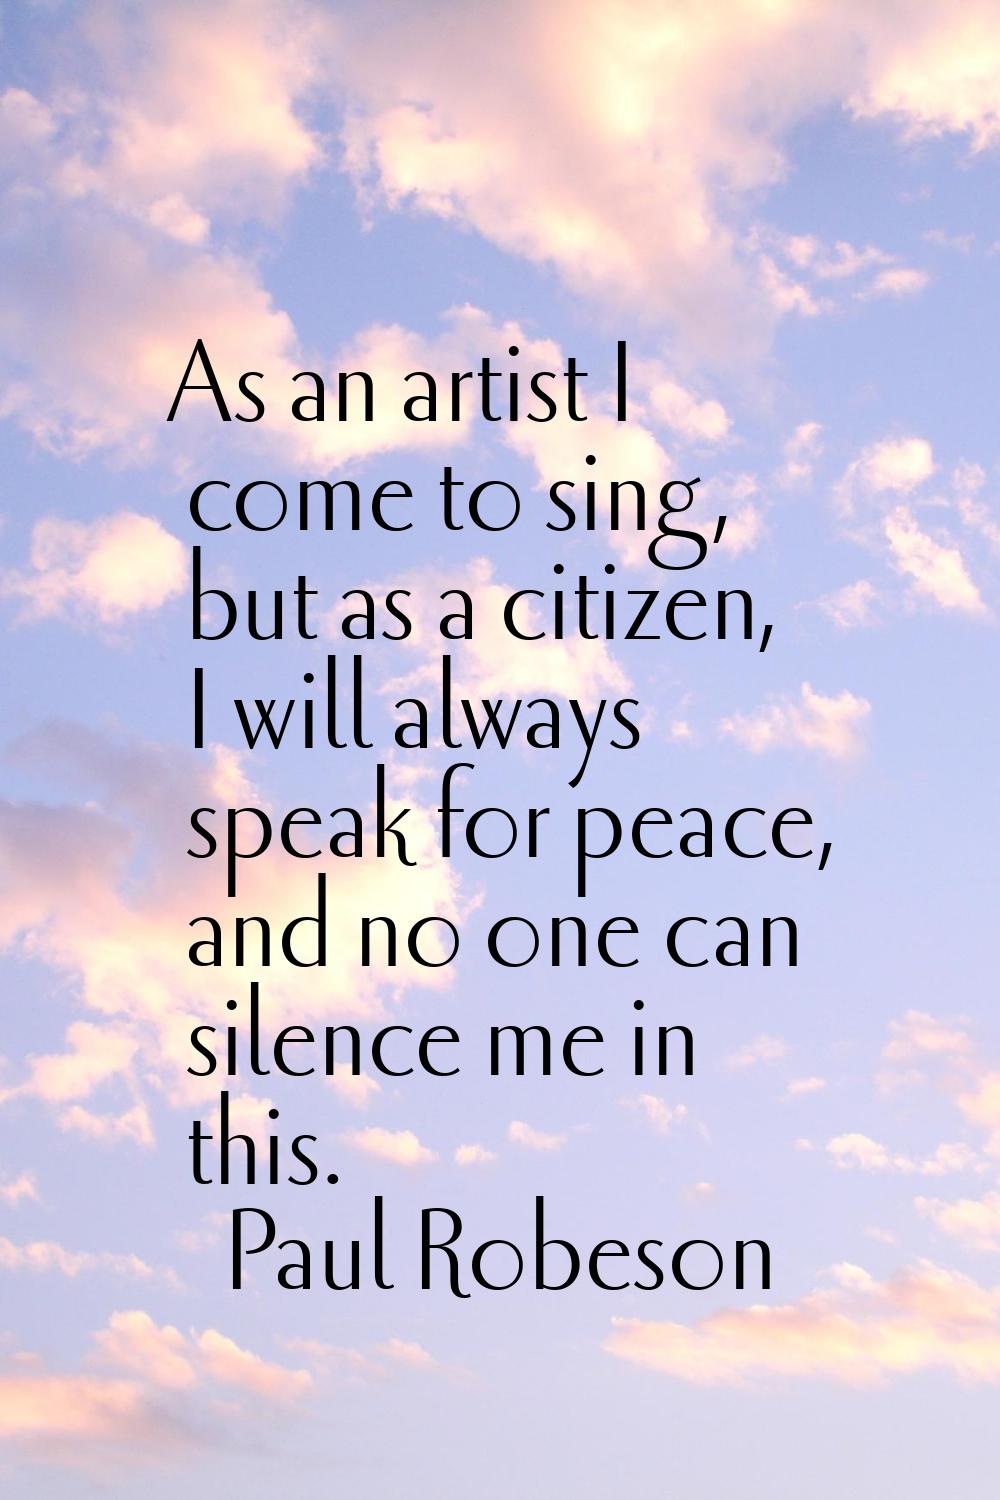 As an artist I come to sing, but as a citizen, I will always speak for peace, and no one can silenc